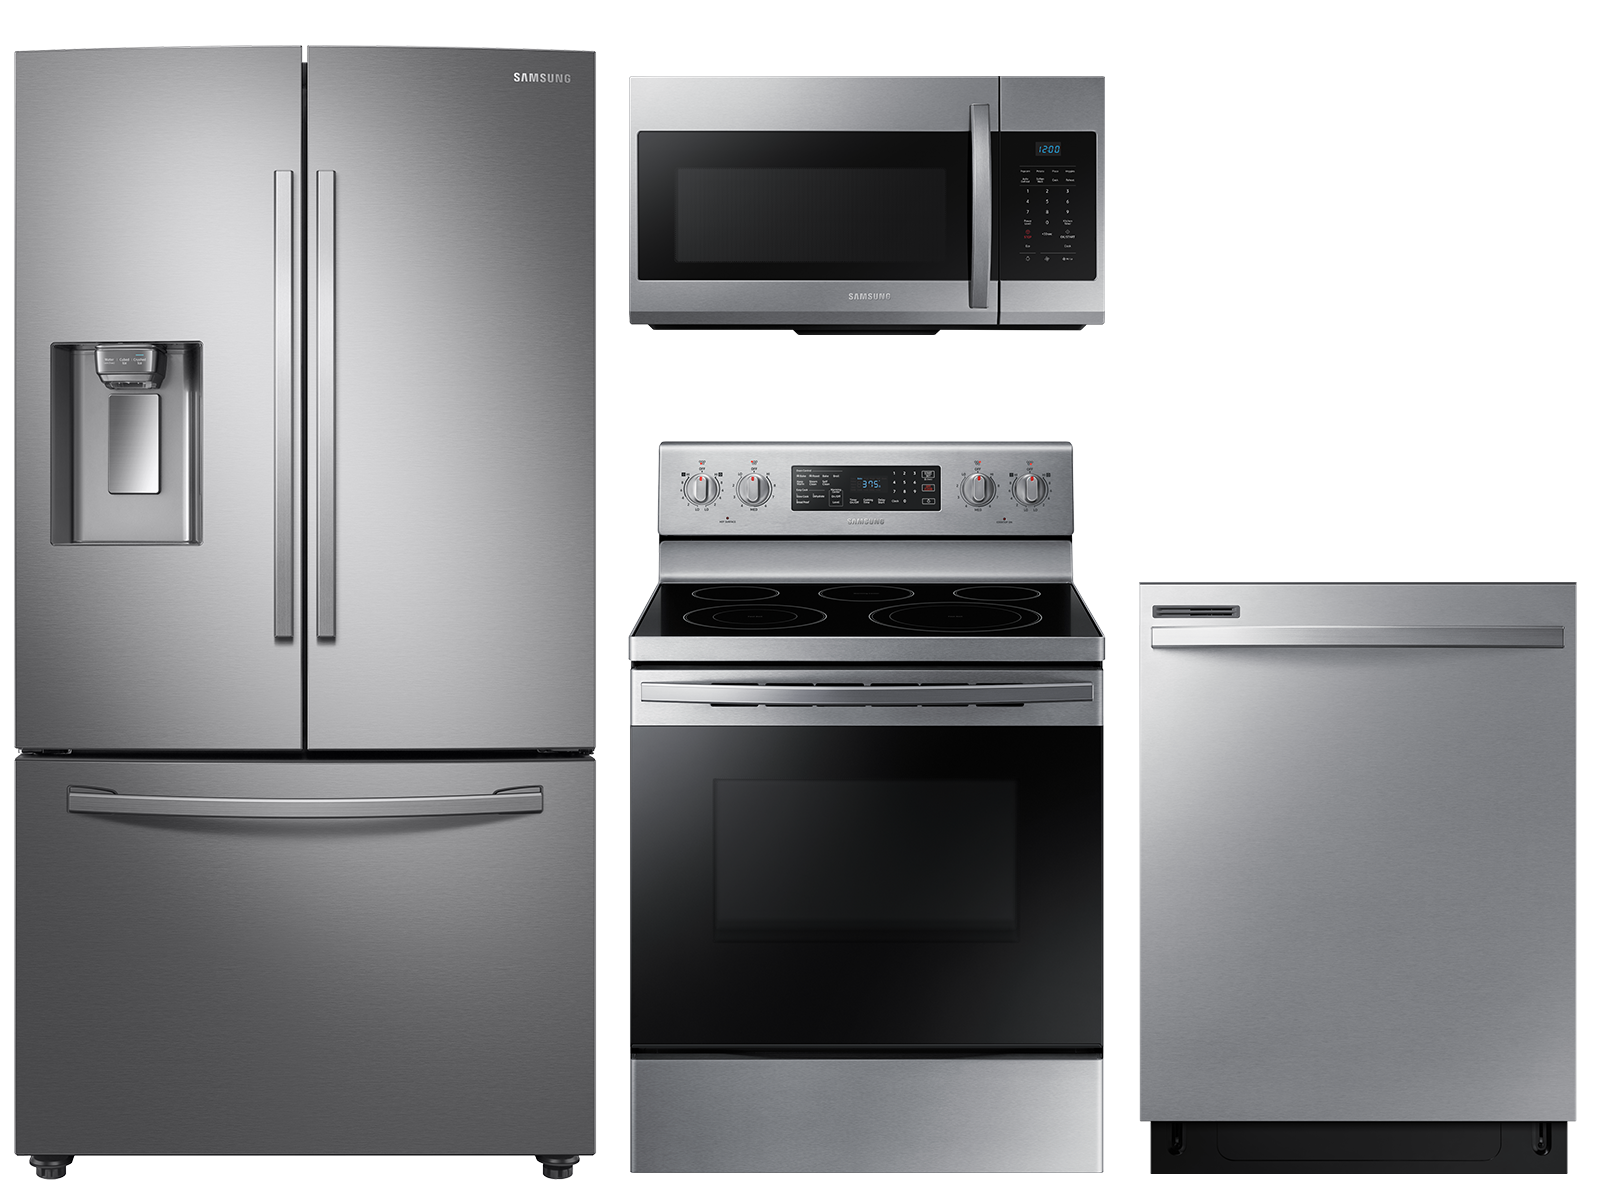 Samsung Large Capacity 3-door Refrigerator + Electric Range with Convection + 55 dBA Dishwasher + Microwave in Stainless Steel